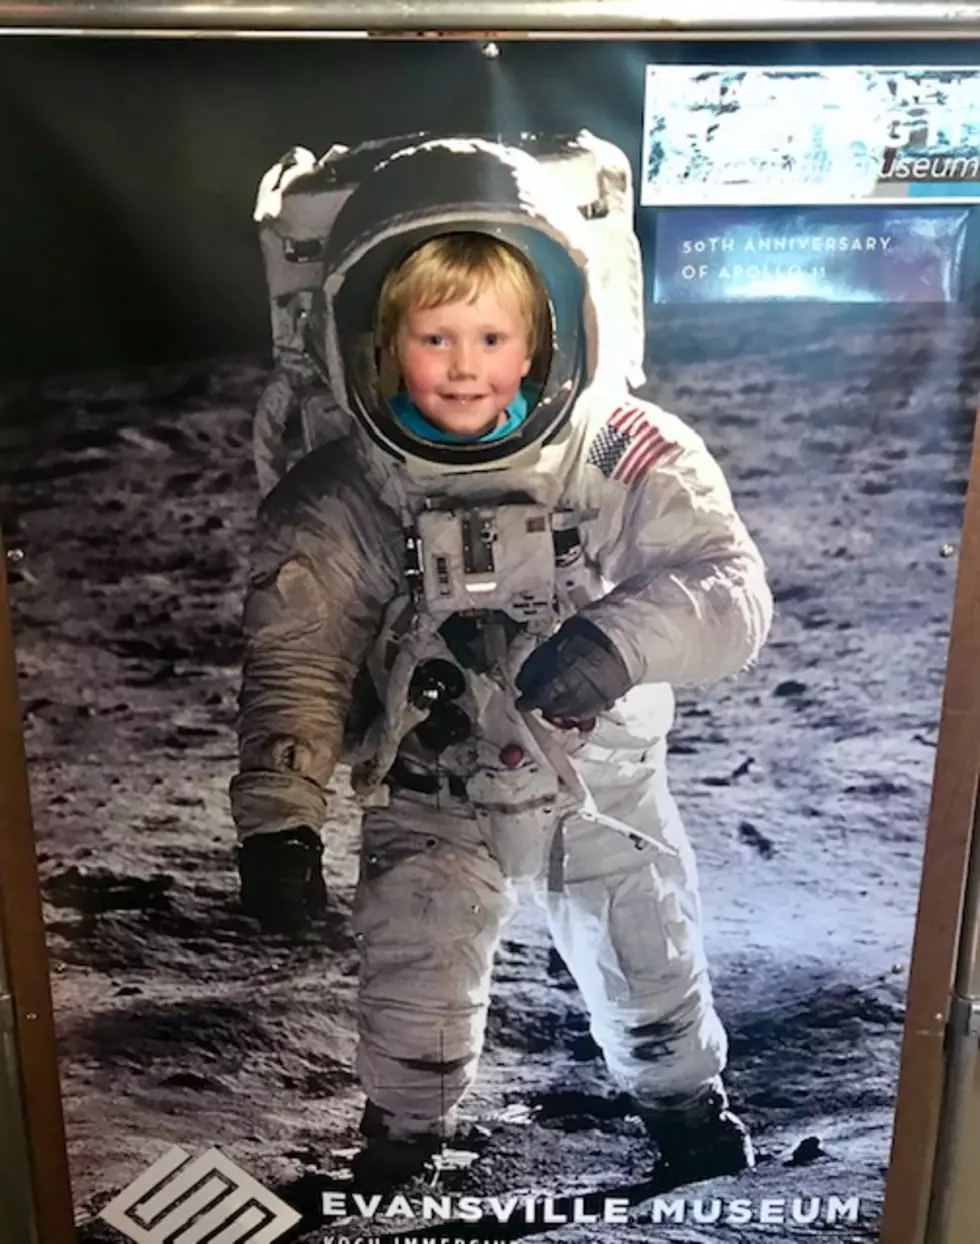 Moon Festival Celebrates the 50th Anniversary of the Apollo Moon Landing at the Evansville Museum